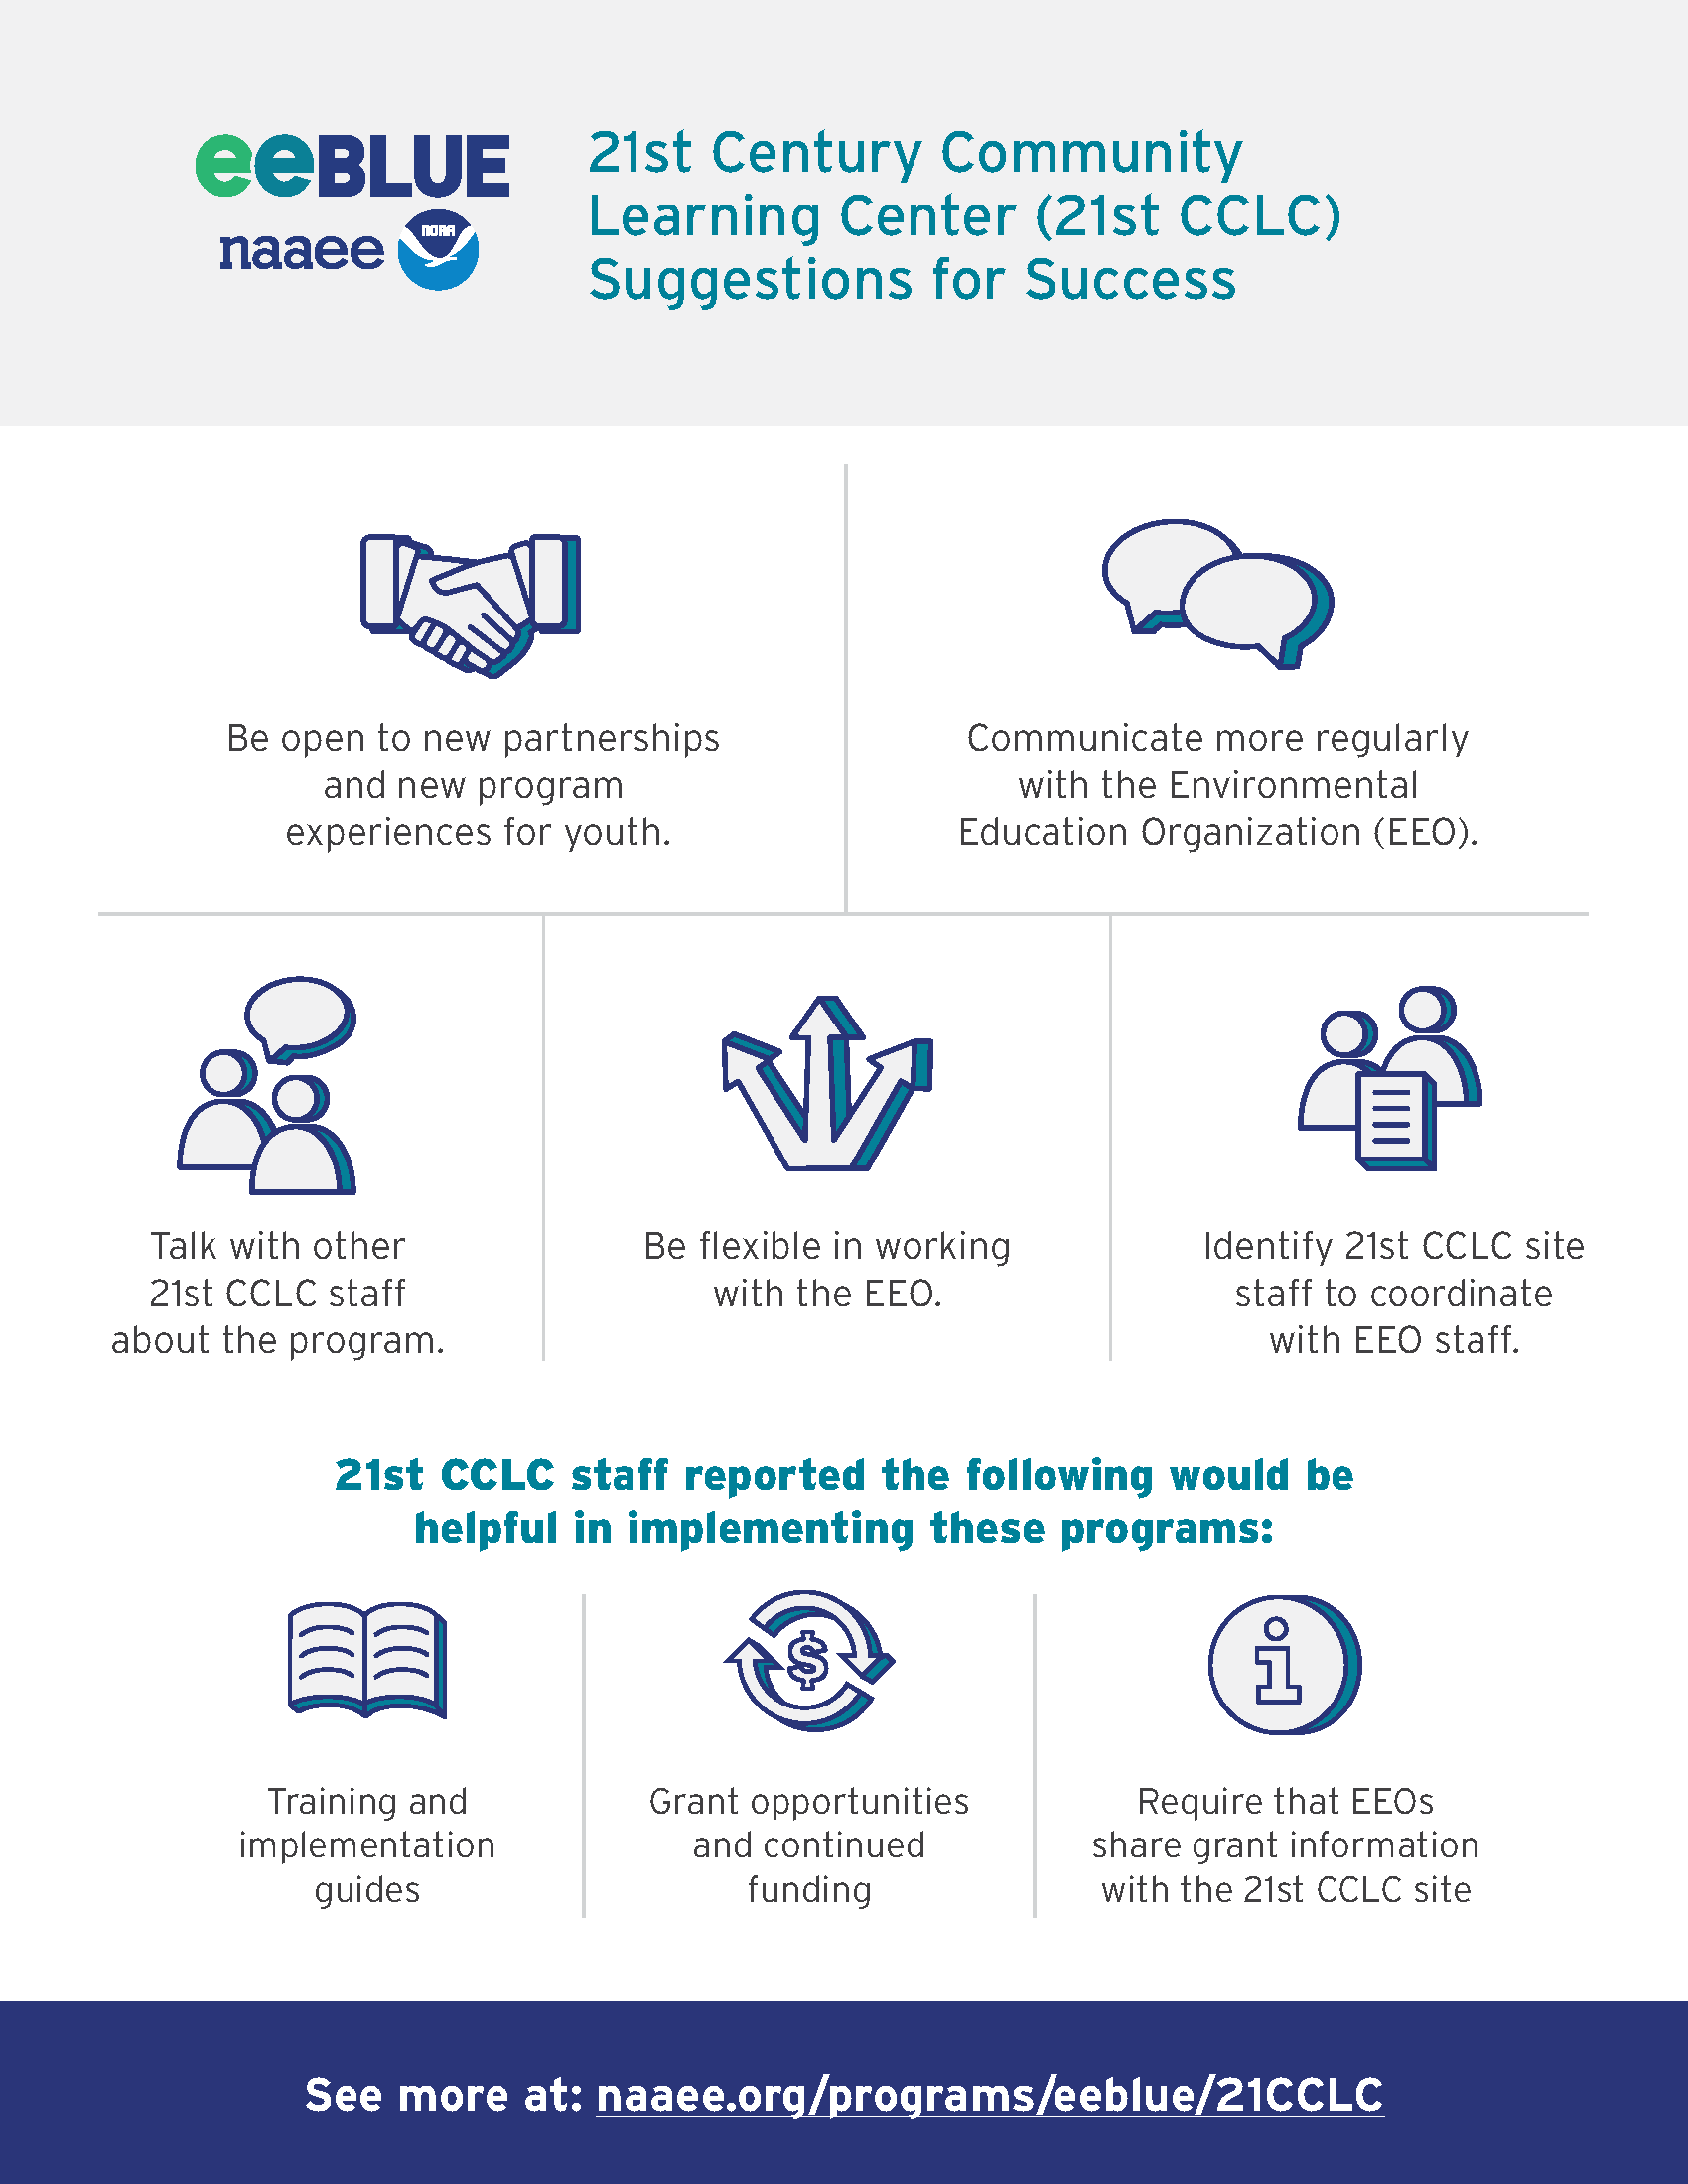 eeBLUE 21st Century Community Learning Center (21st CCLC) Suggestions for Success infographic